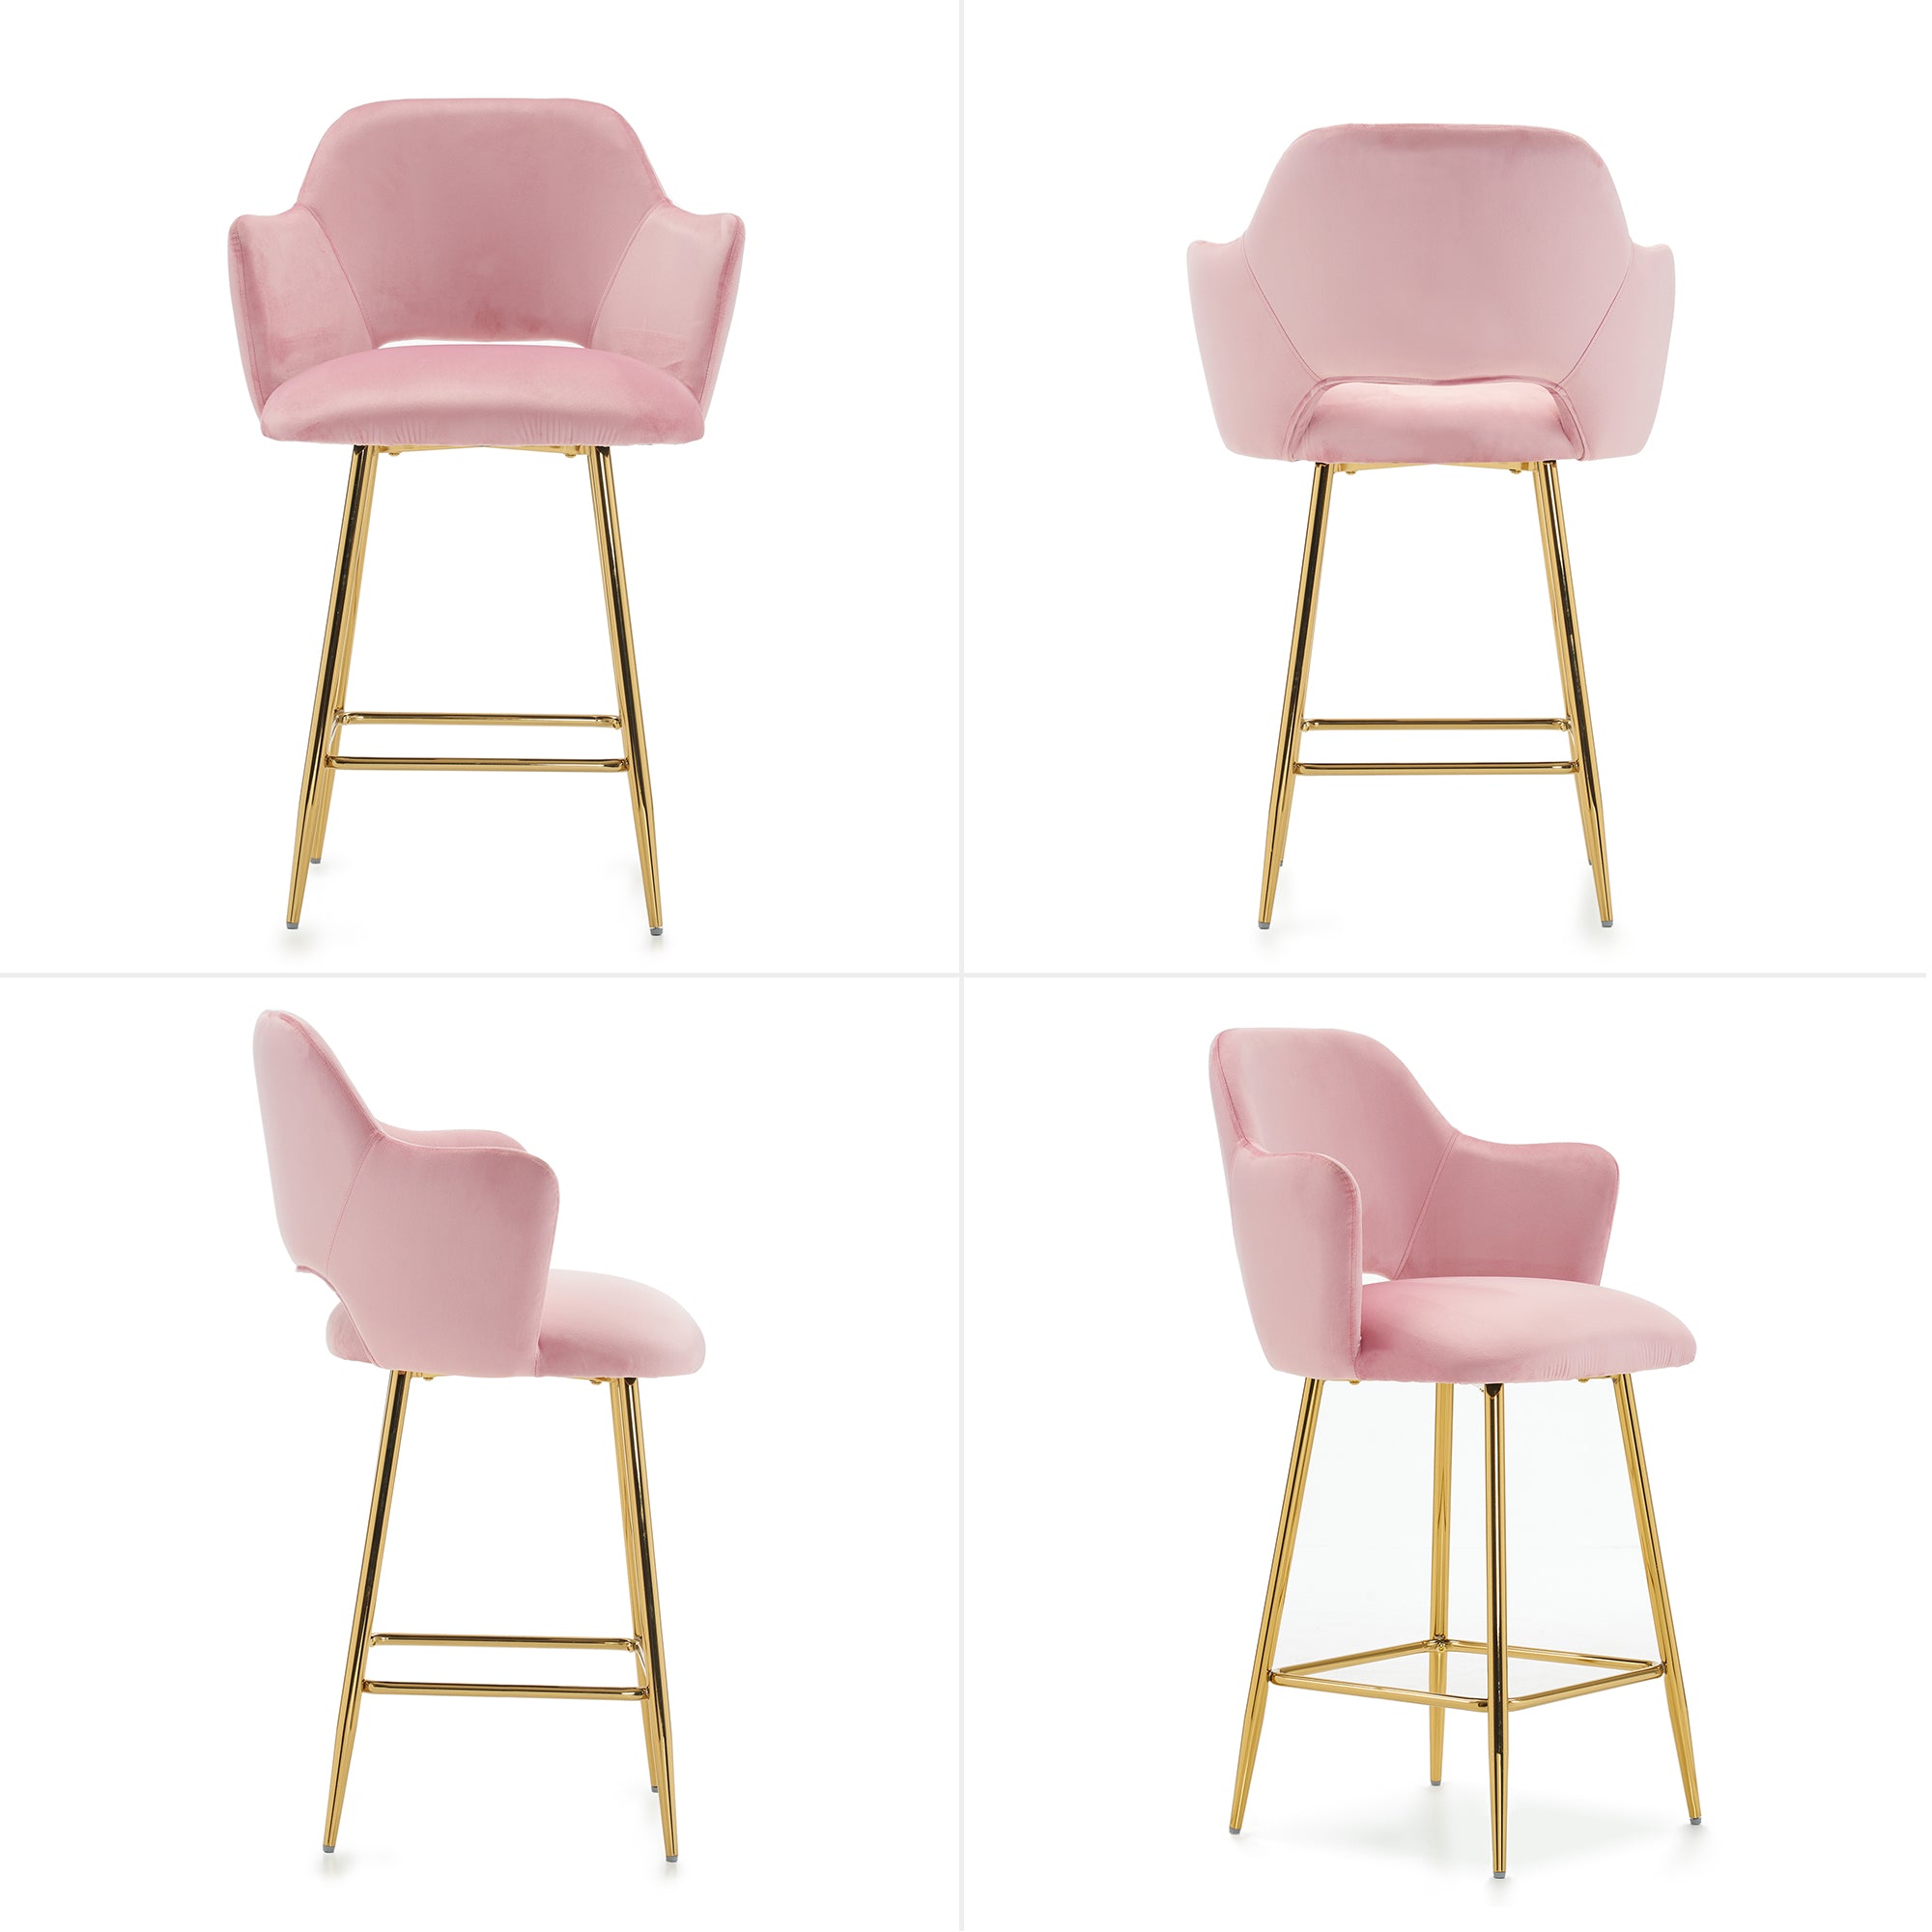 Ivinta Dining Chair, Upholstered Armchair with Gold Metal Legs for Kitchen